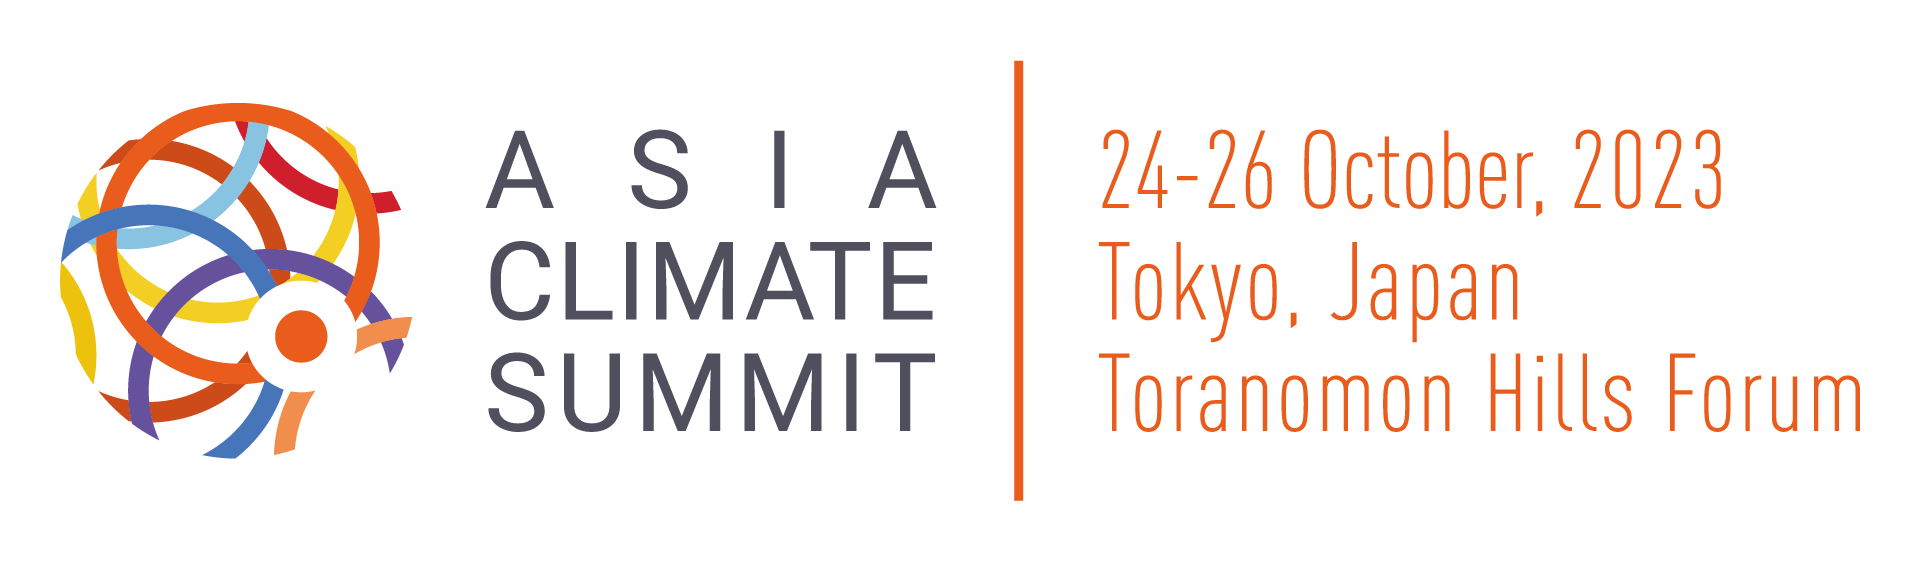 Asia Climate Summit 2023